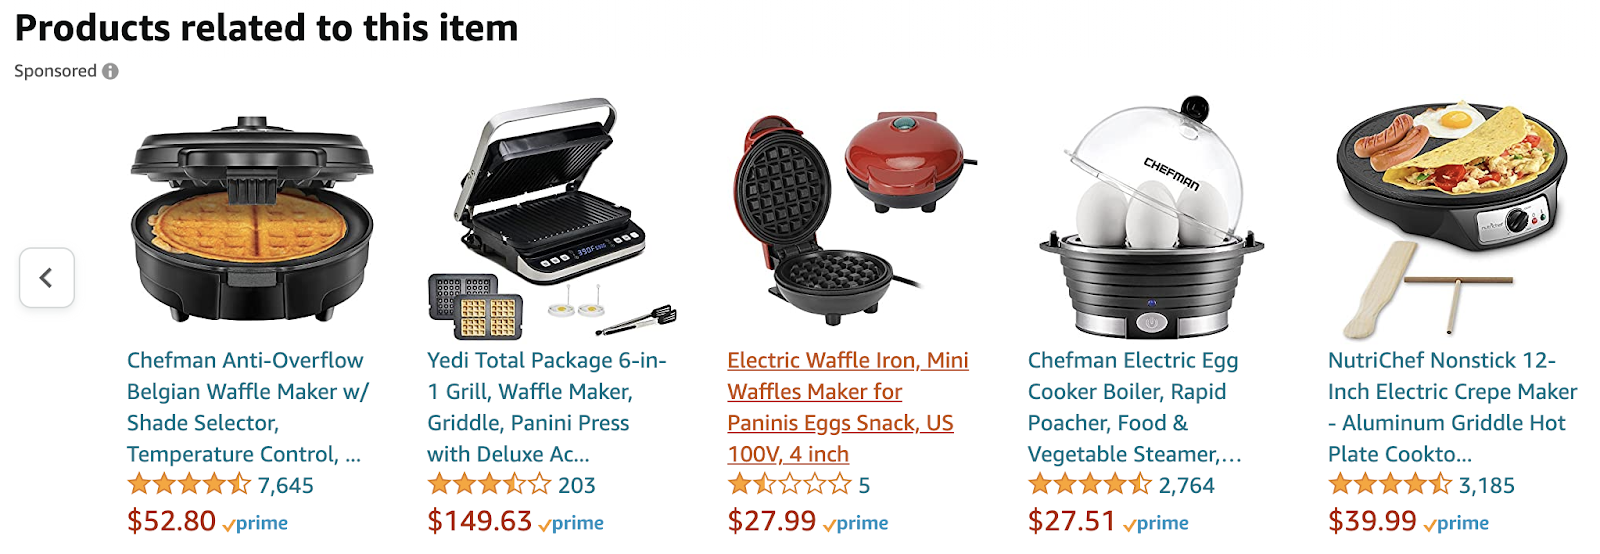 Related products to the selected items are waffle makers, egg-boiler, and crepe makers.